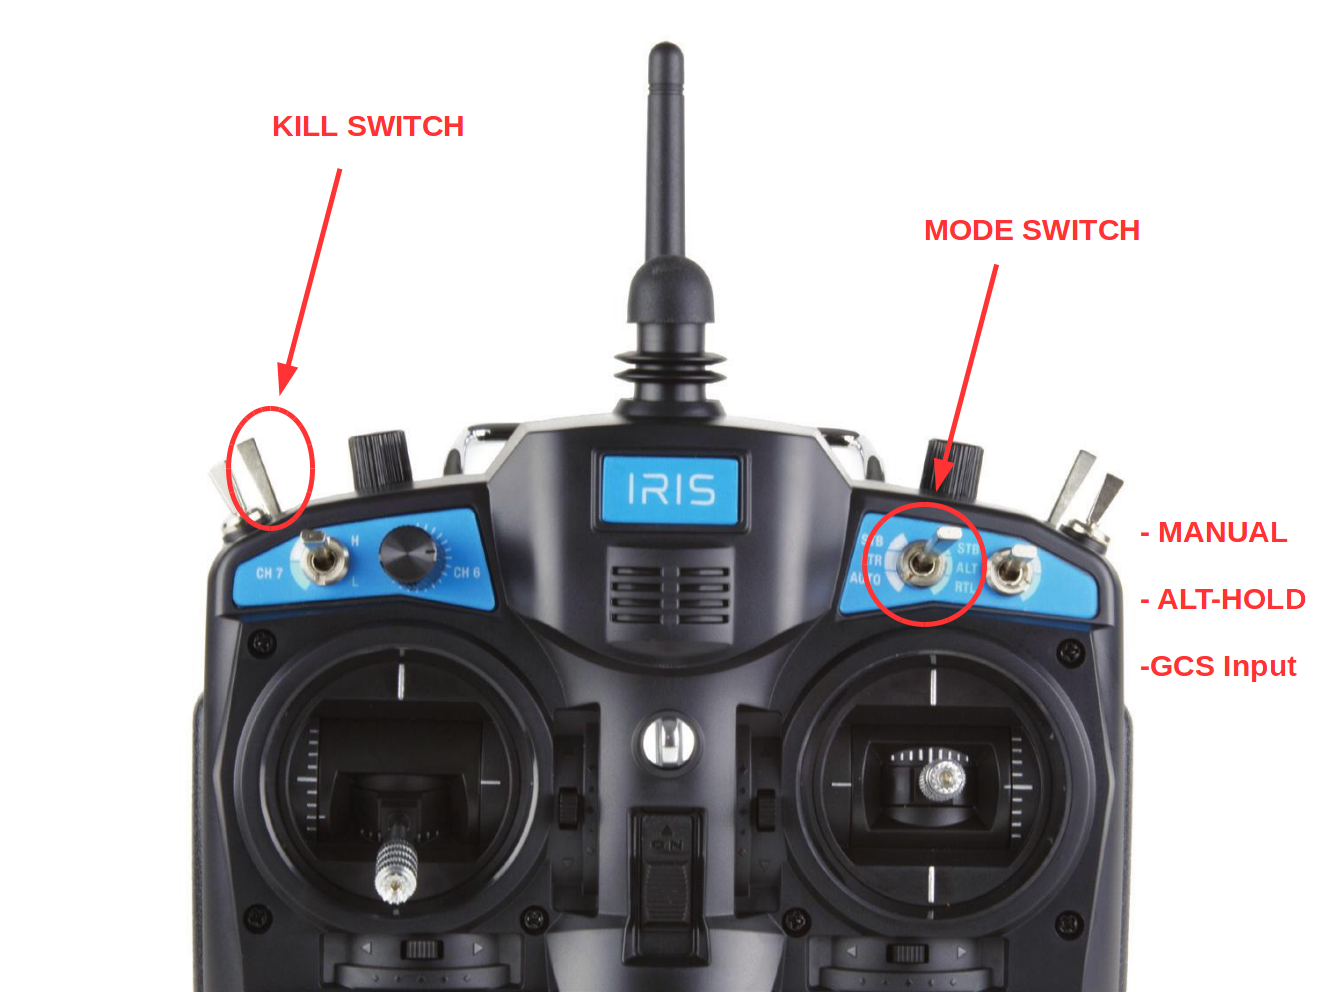 RC switches